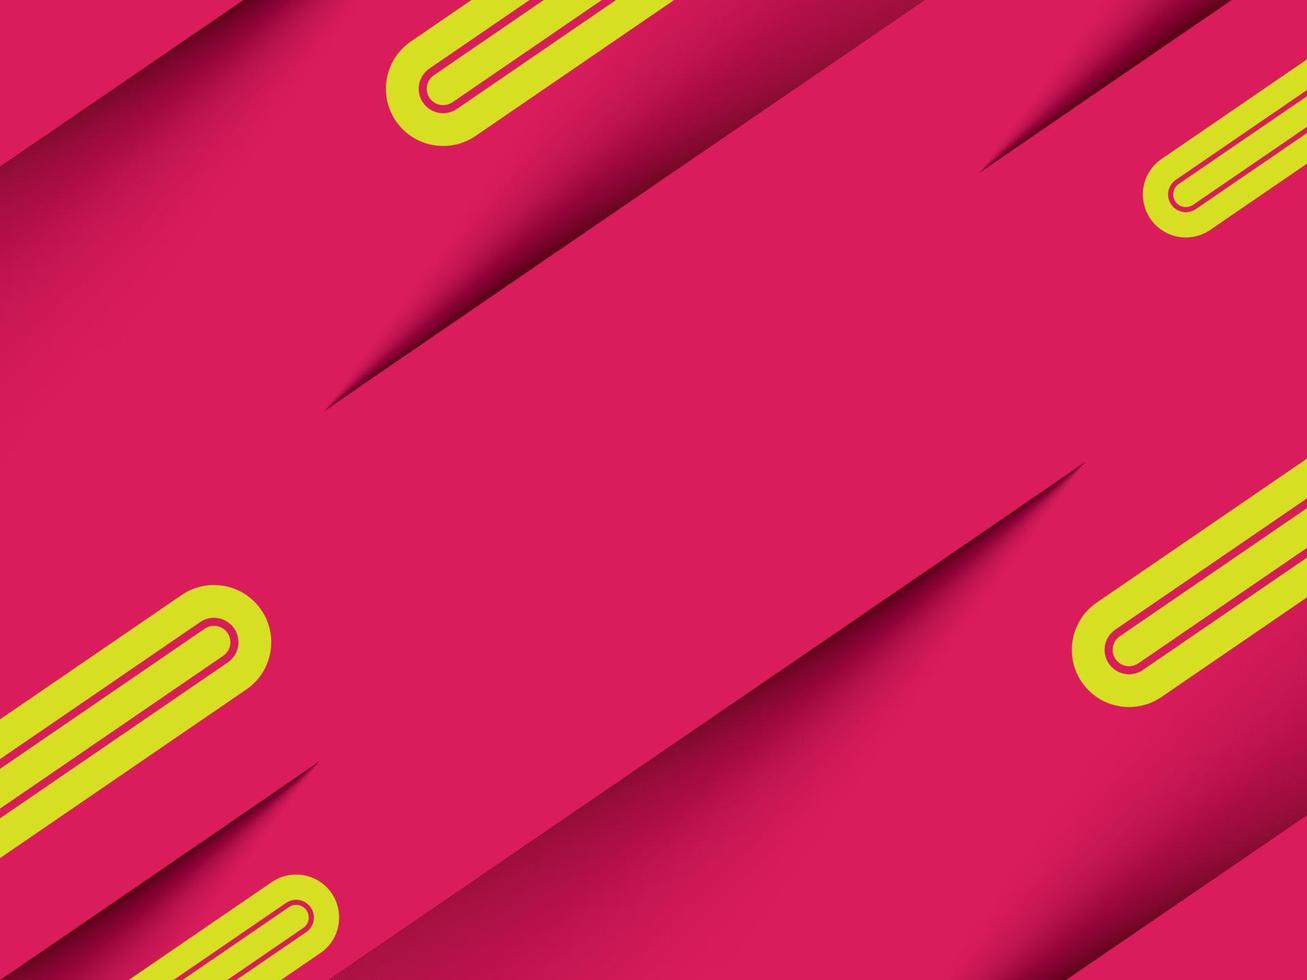 Abstract geometric shape gradient on yellow and pink background. Vector graphic illustration.